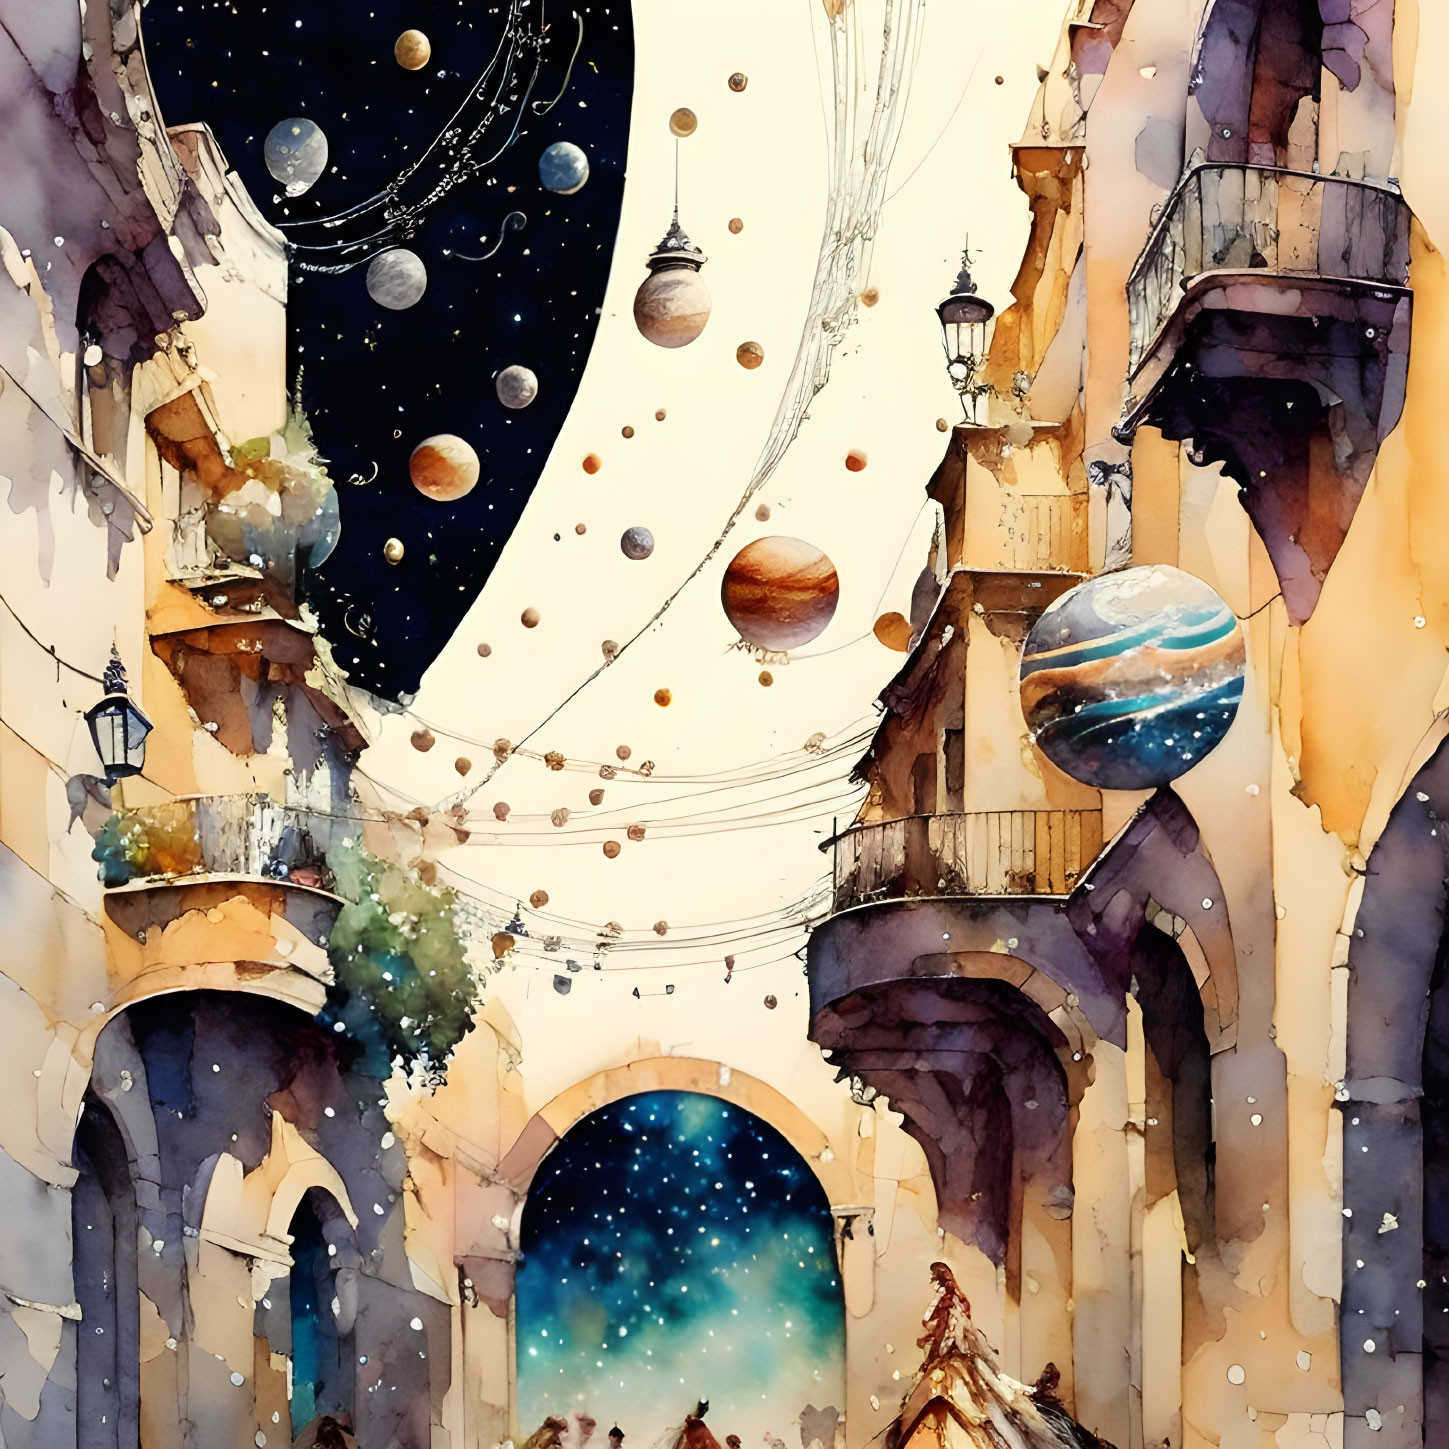 Watercolor street scene with buildings, lanterns, and fantasy cosmos.